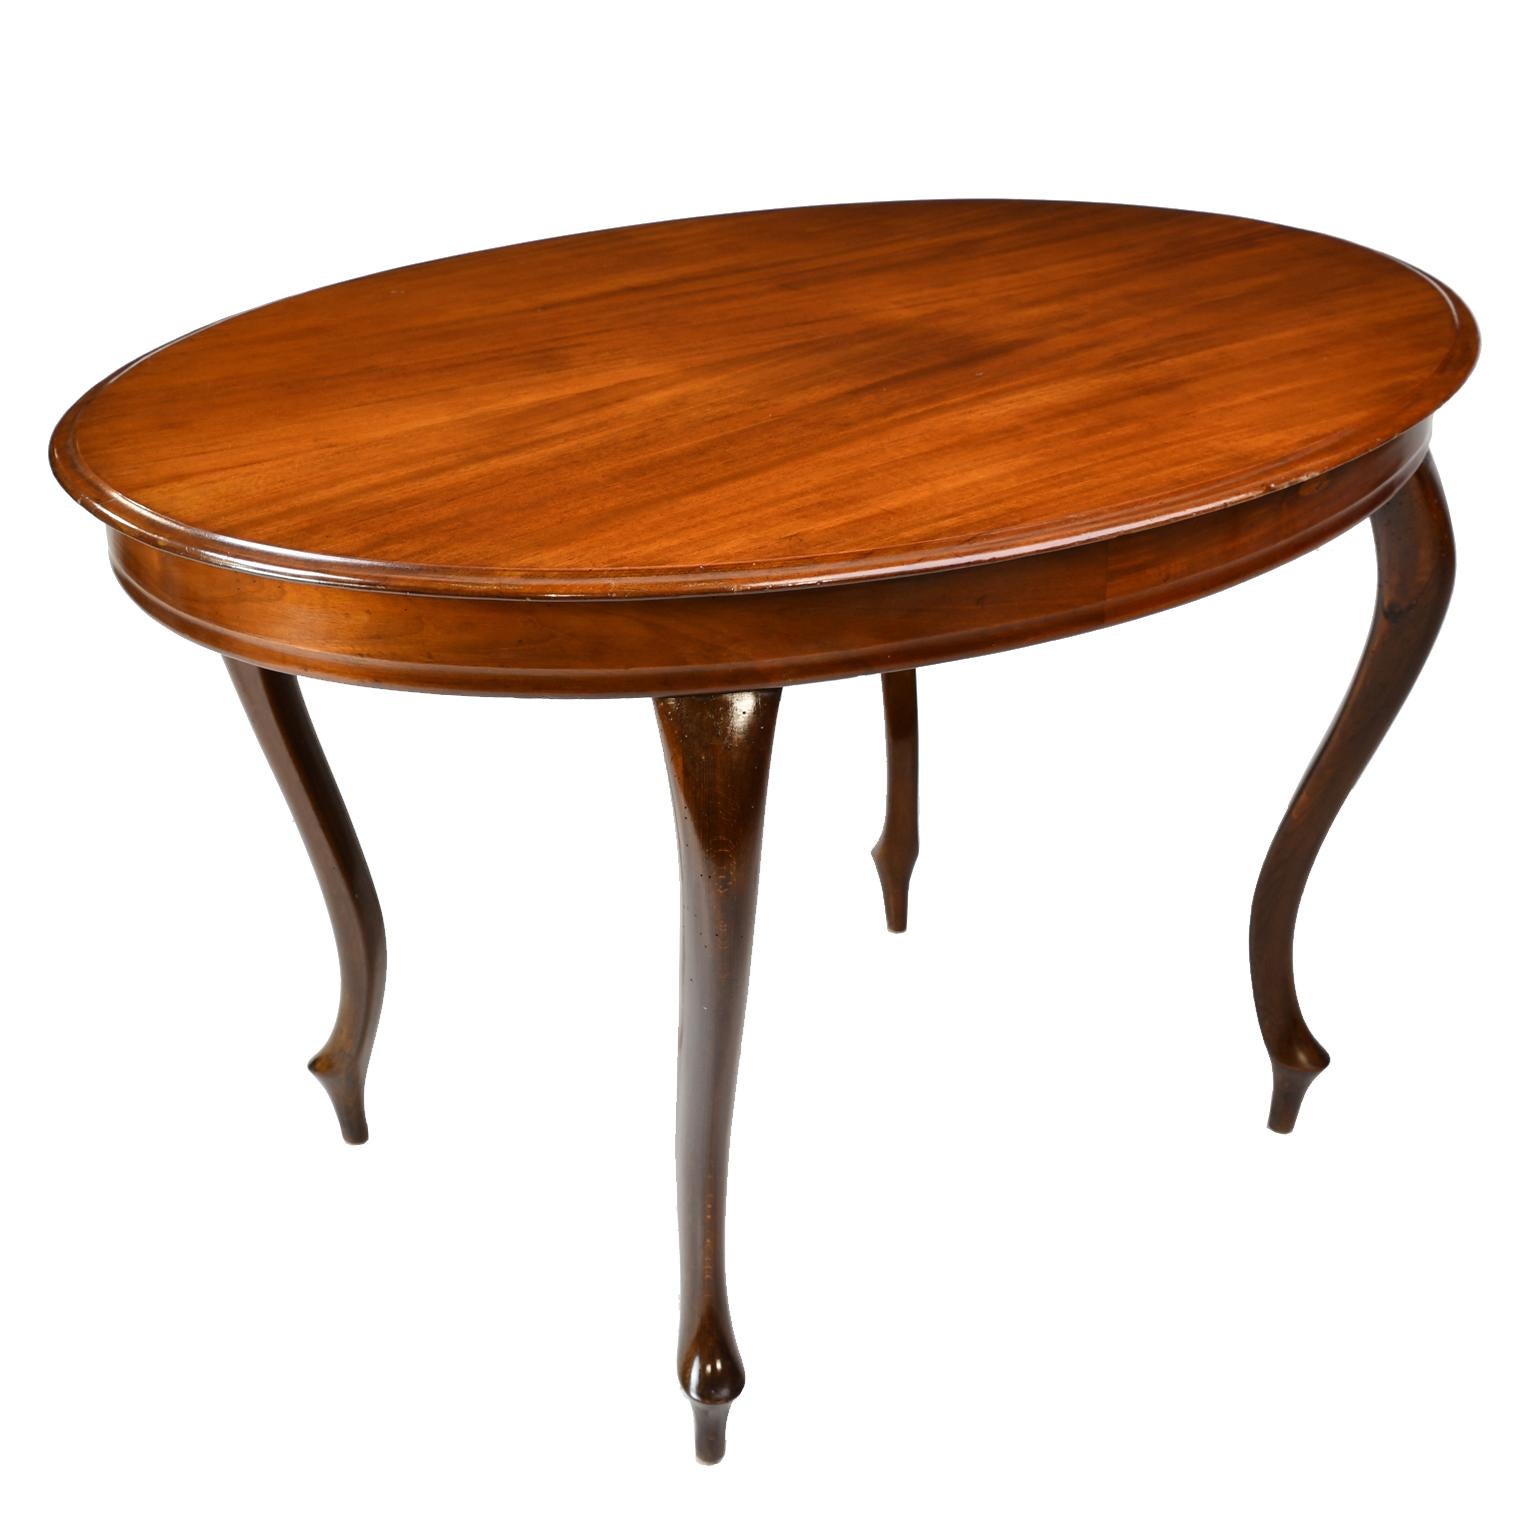 Polished Antique Louis Philippe Style Mahogany Oval Dining/ Center Table, Denmark, c 1860 For Sale